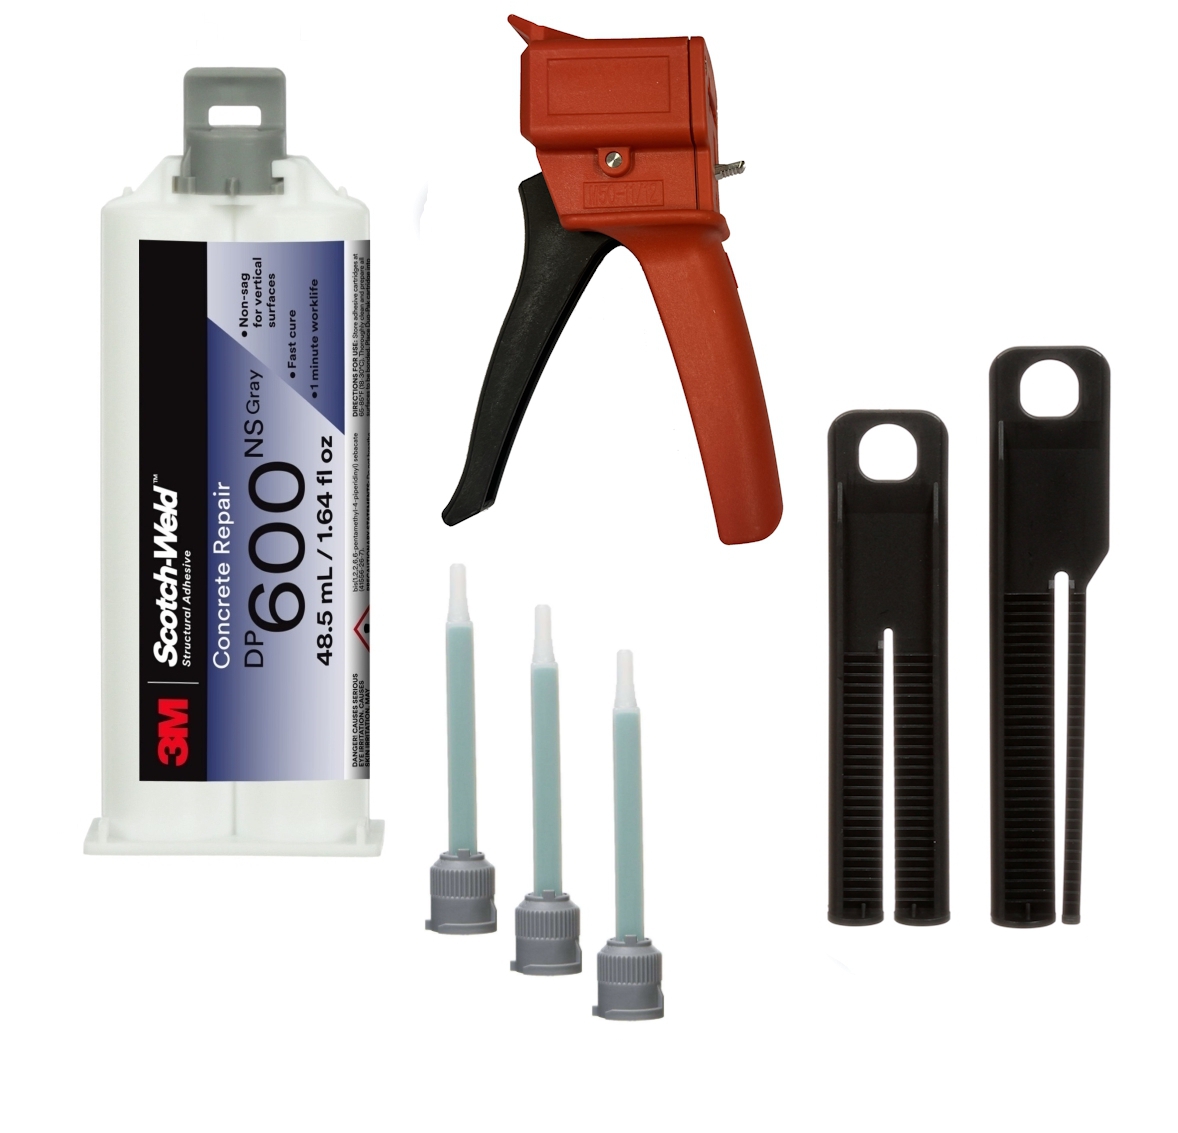 Starter set: 1x 3M Scotch-Weld 2-component construction adhesive EPX DP600, gray, 48.5 ml, 1x S-K-S hand tool for EPX 38 to 50 ml cartridges incl. feed piston 2:1